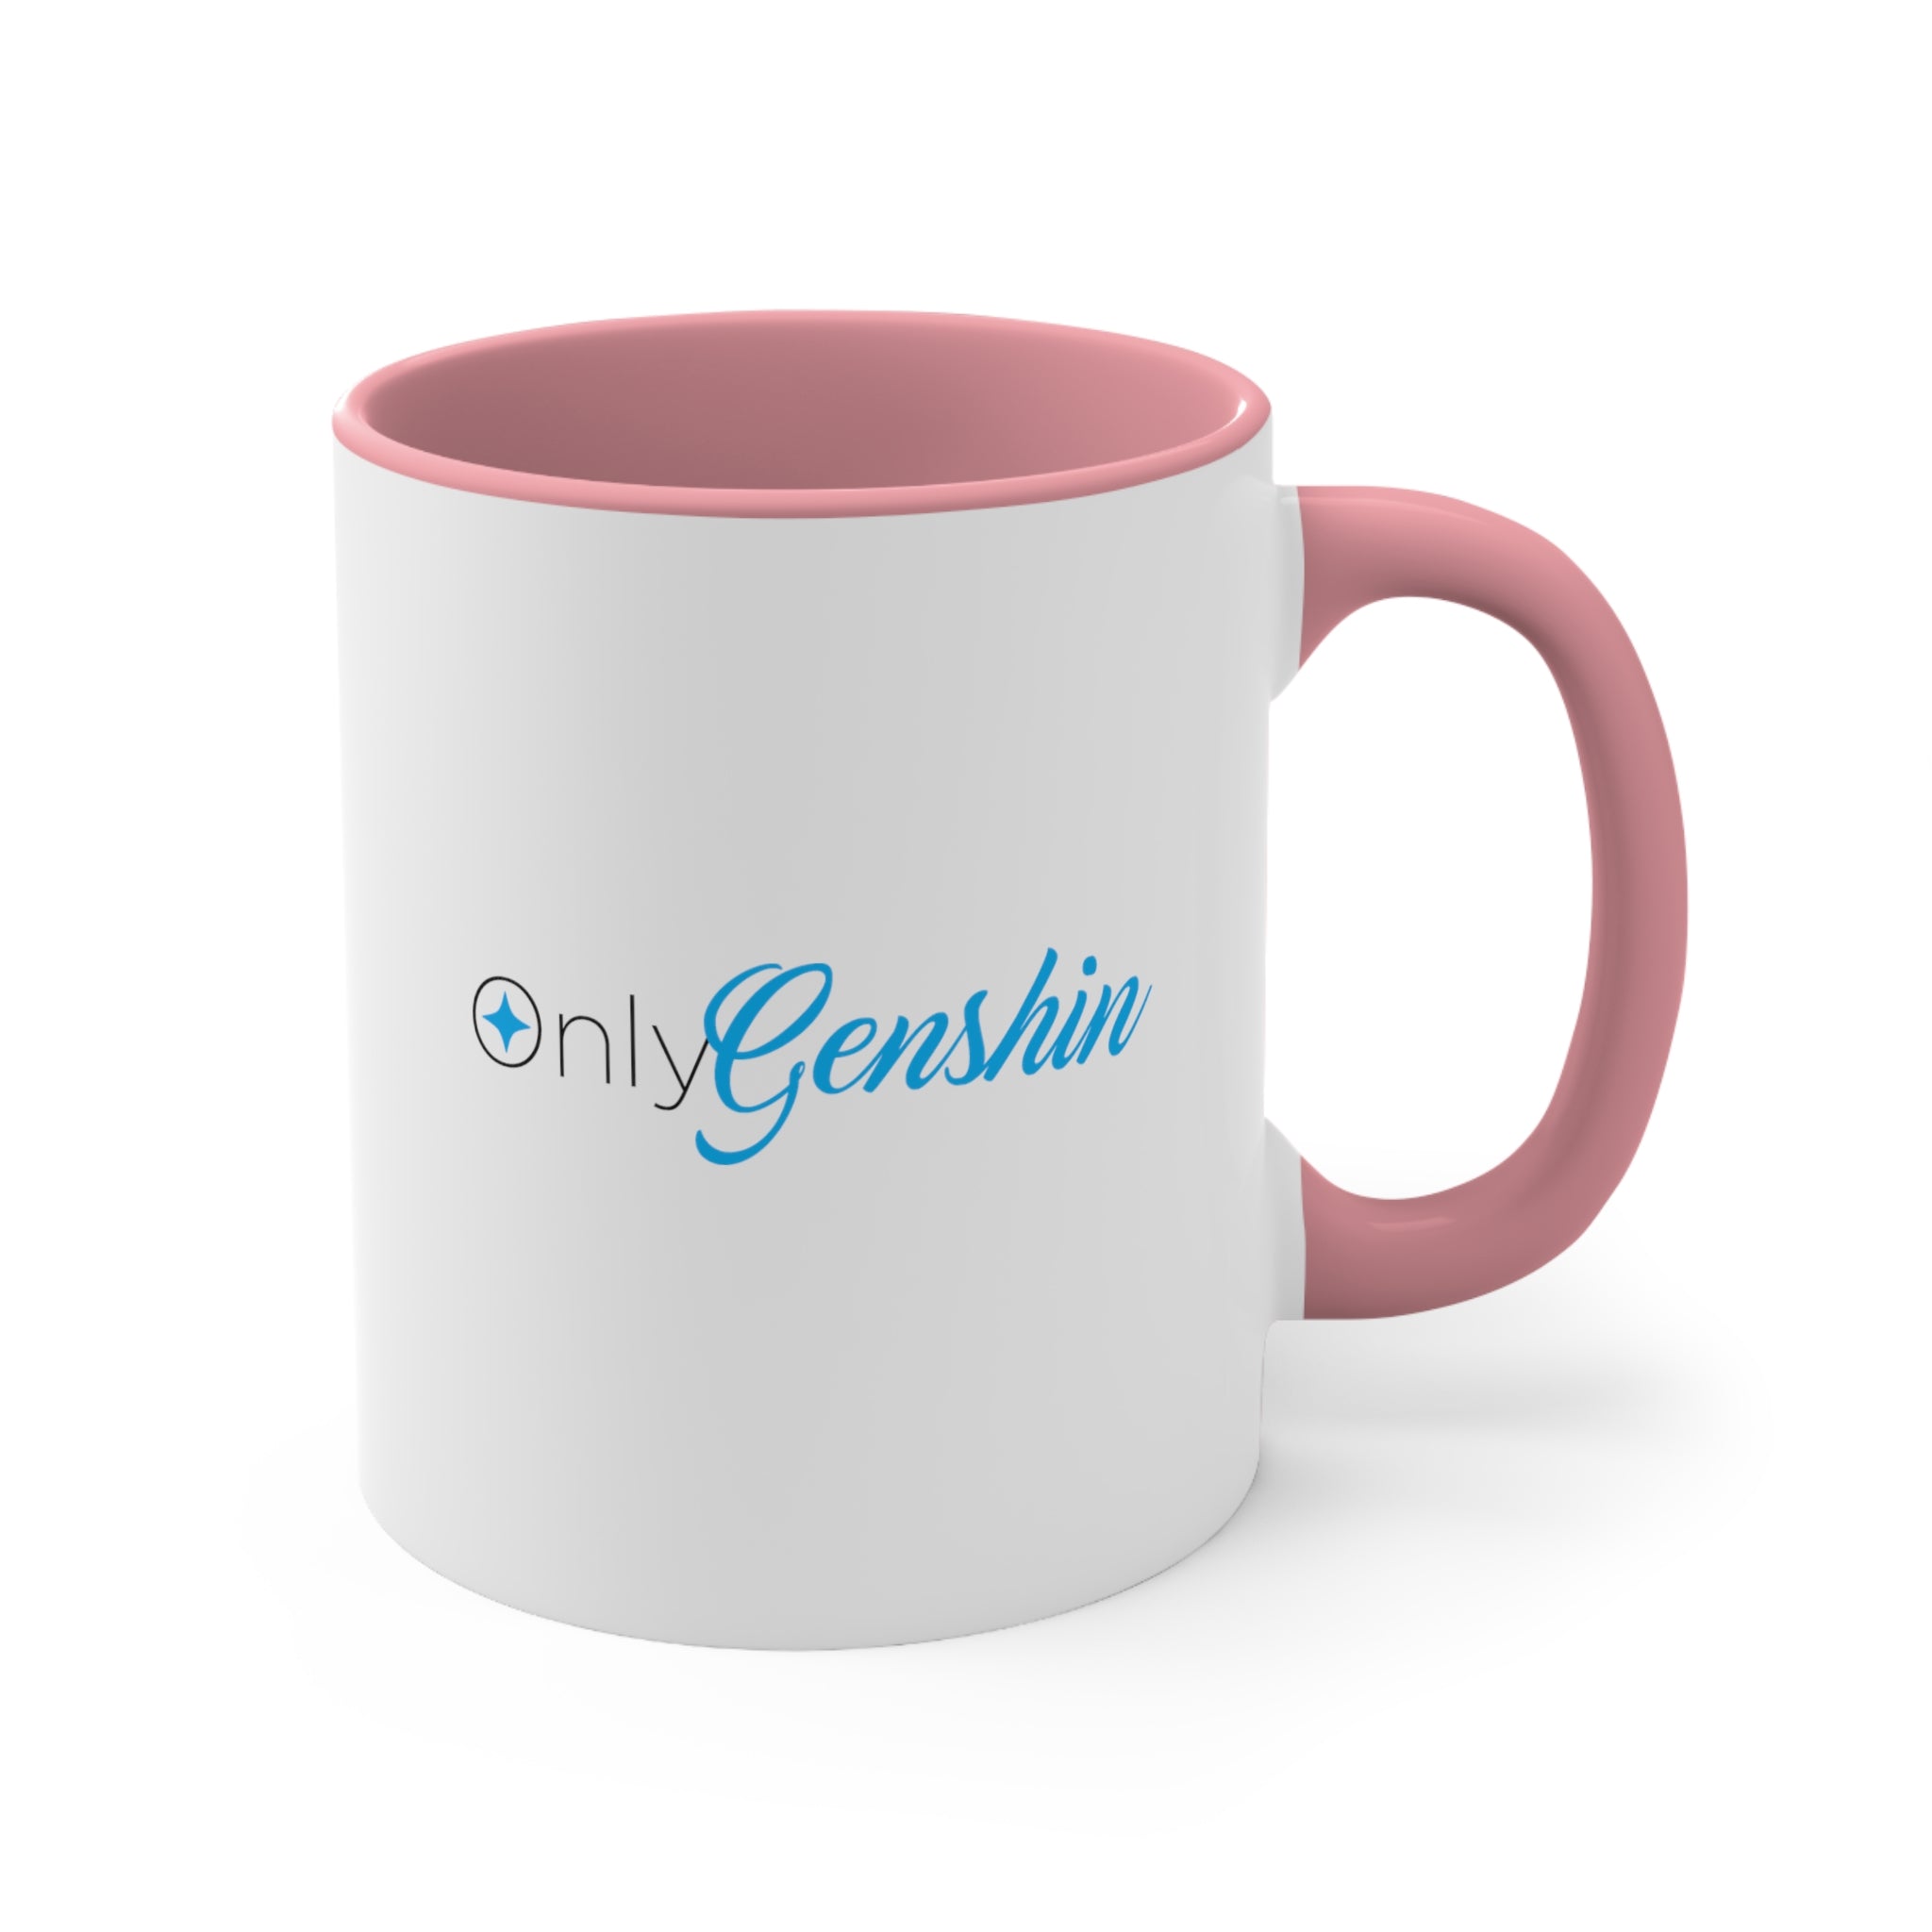 OnlyGenshinAccent Coffee Mug, 11oz Genshin Impact Cups Cup Mugs Onlyfans Inspired Funny Humor Humour Joke Pun Comedy Game Gift Gifts For Gamer Birthday Christmas Valentine's